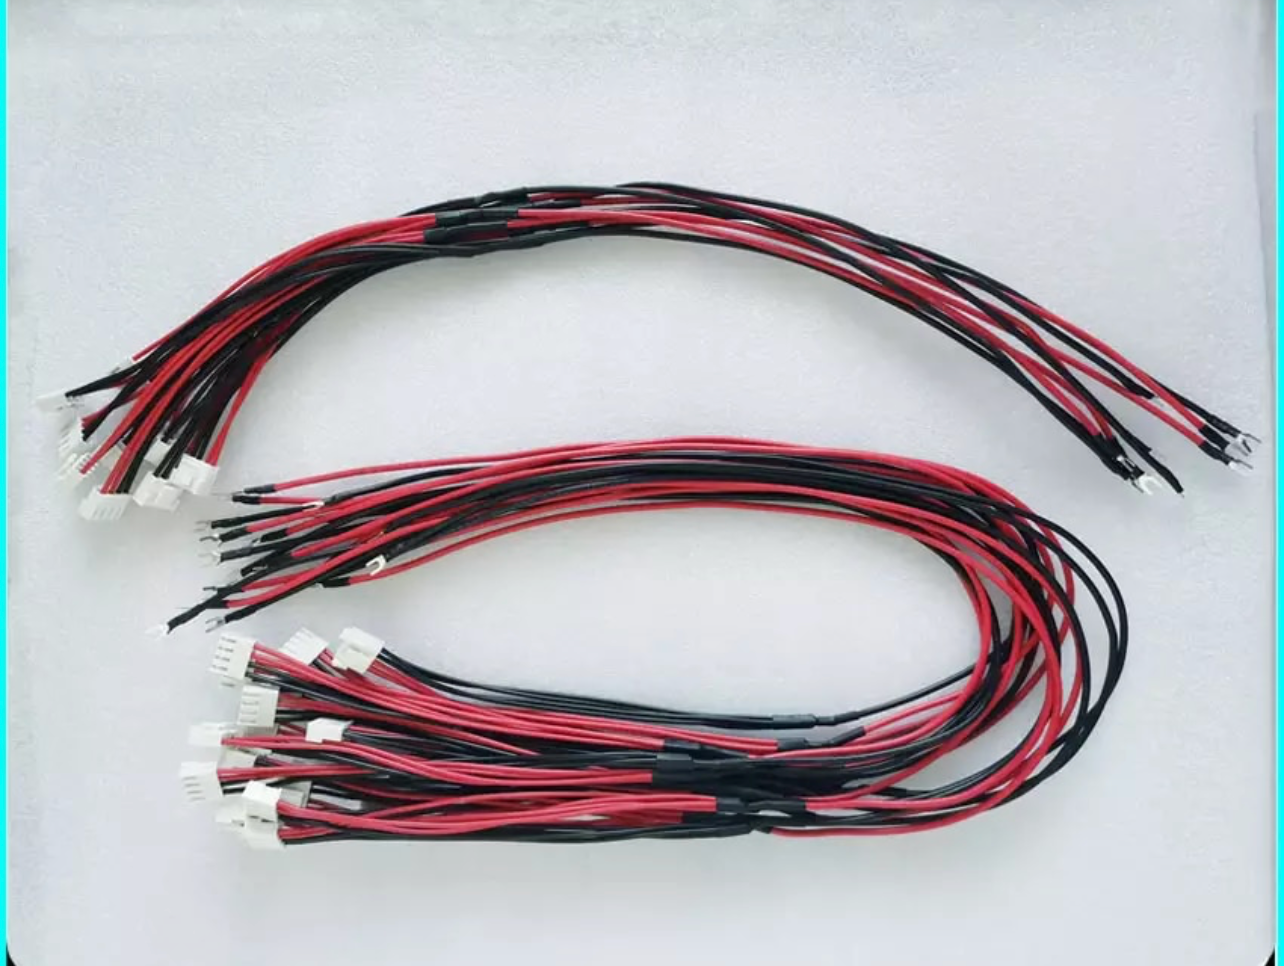 4 Pin 5V Power Cable for Indoor LED Display Panels